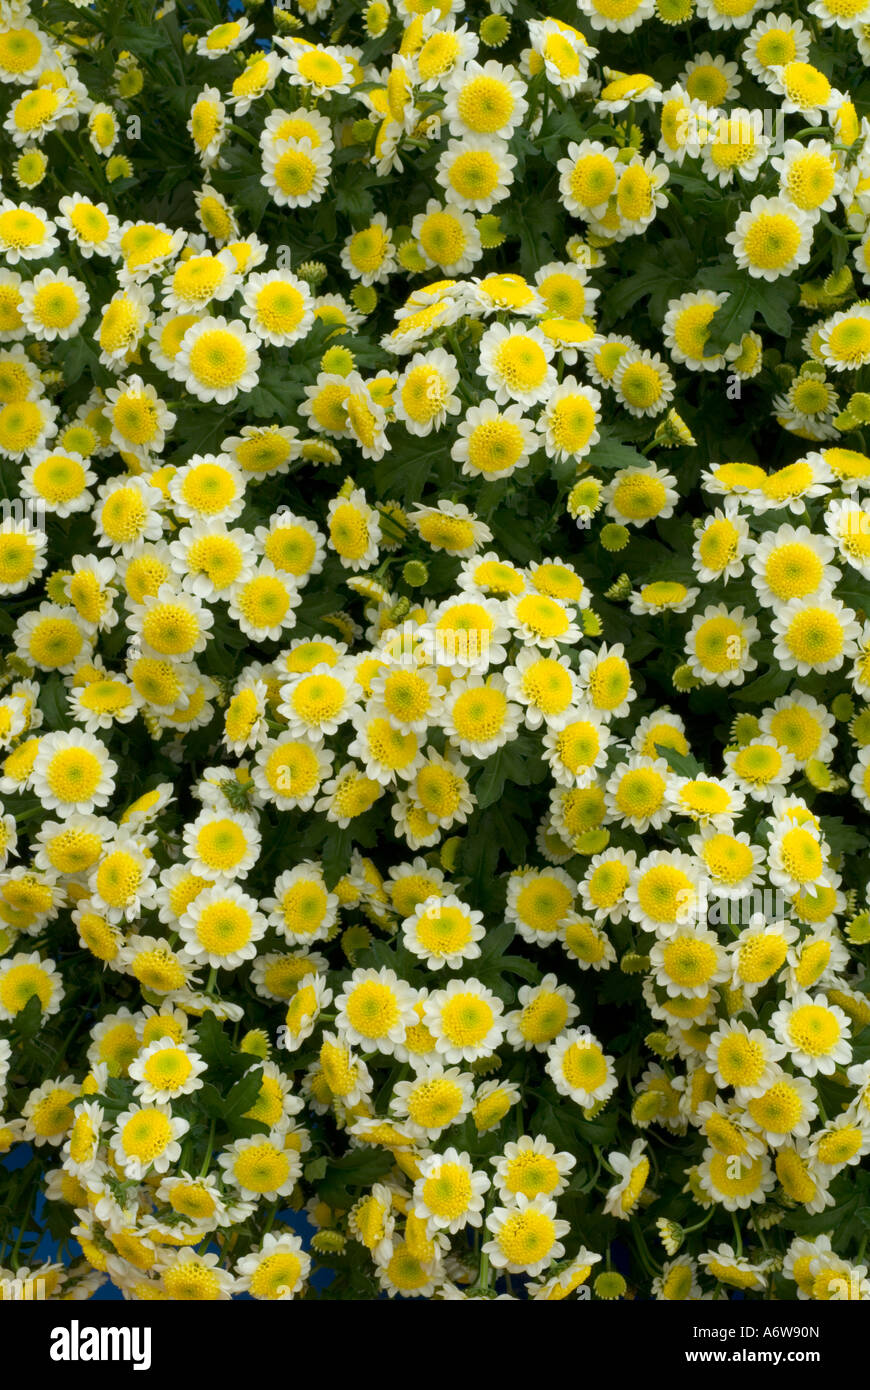 Chrysanthemum 'Sun Up' tiny yellow and white pompom flowers full frame background Stock Photo